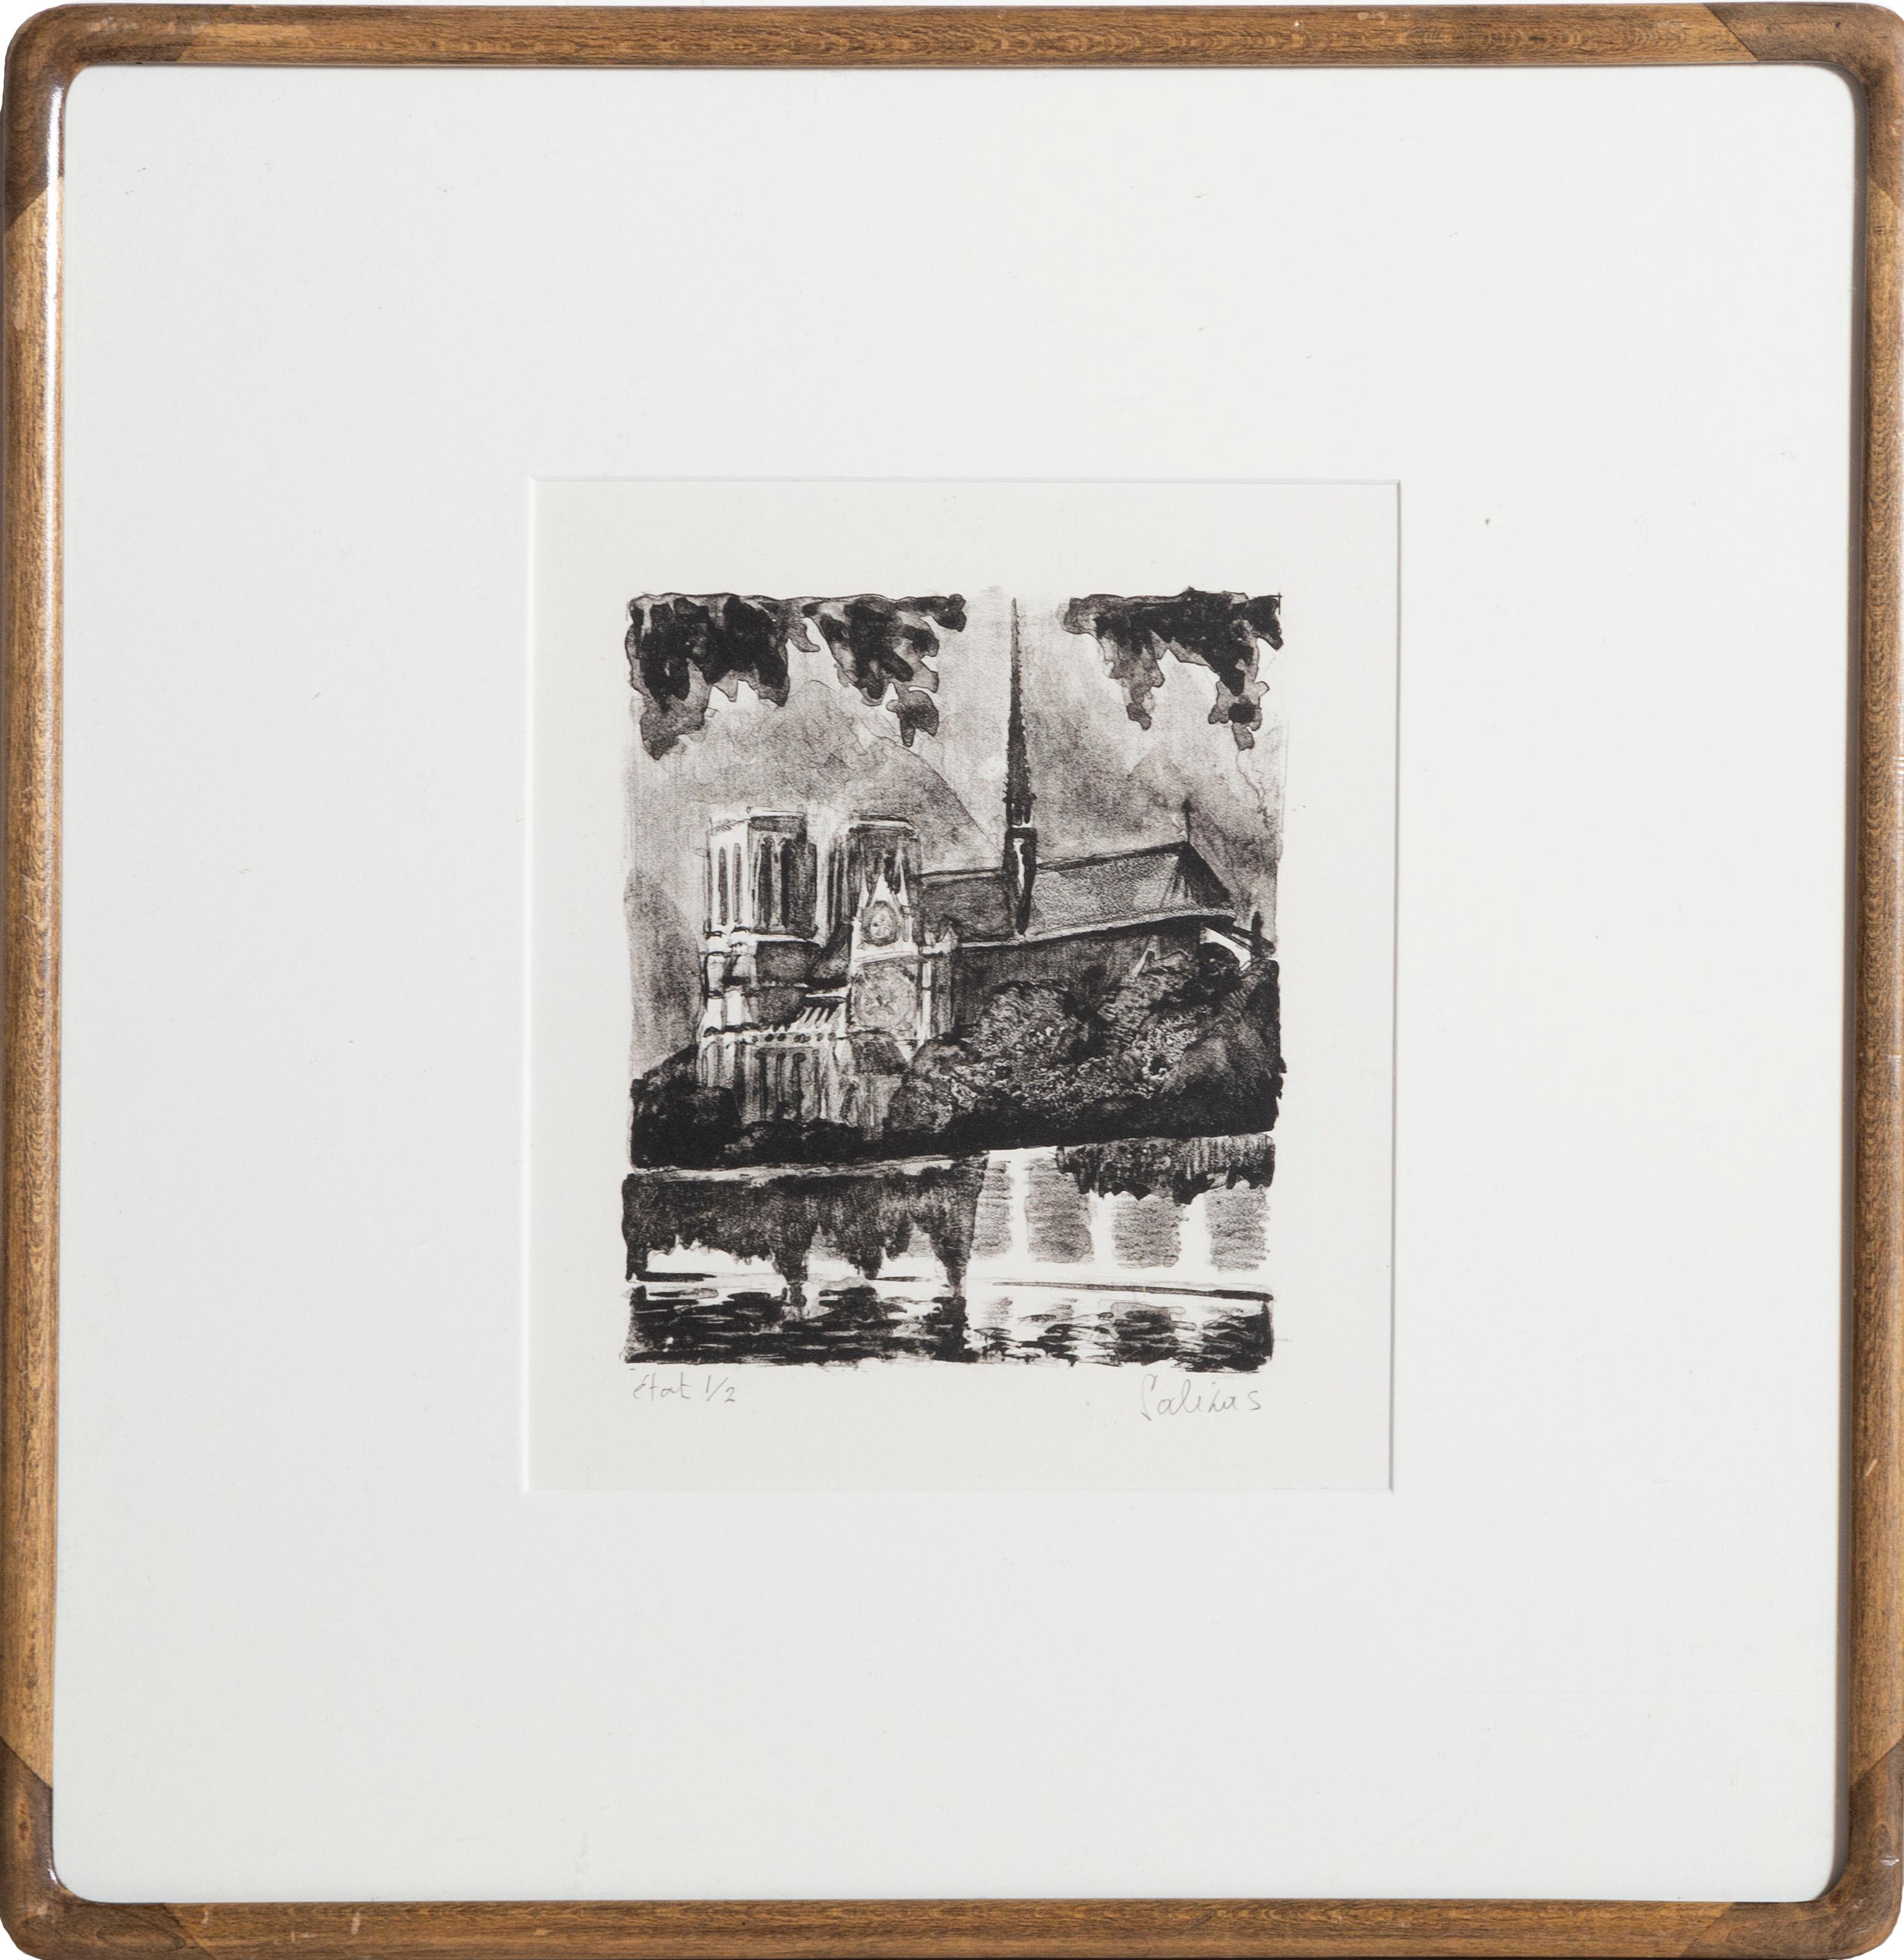 Laurent Marcel Salinas, Egyptian/French (1913 - 2010) -  Notre Dame. Year: circa 1960, Medium: Lithograph, signed in pencil, Frame Size: 16 x 16 inches 